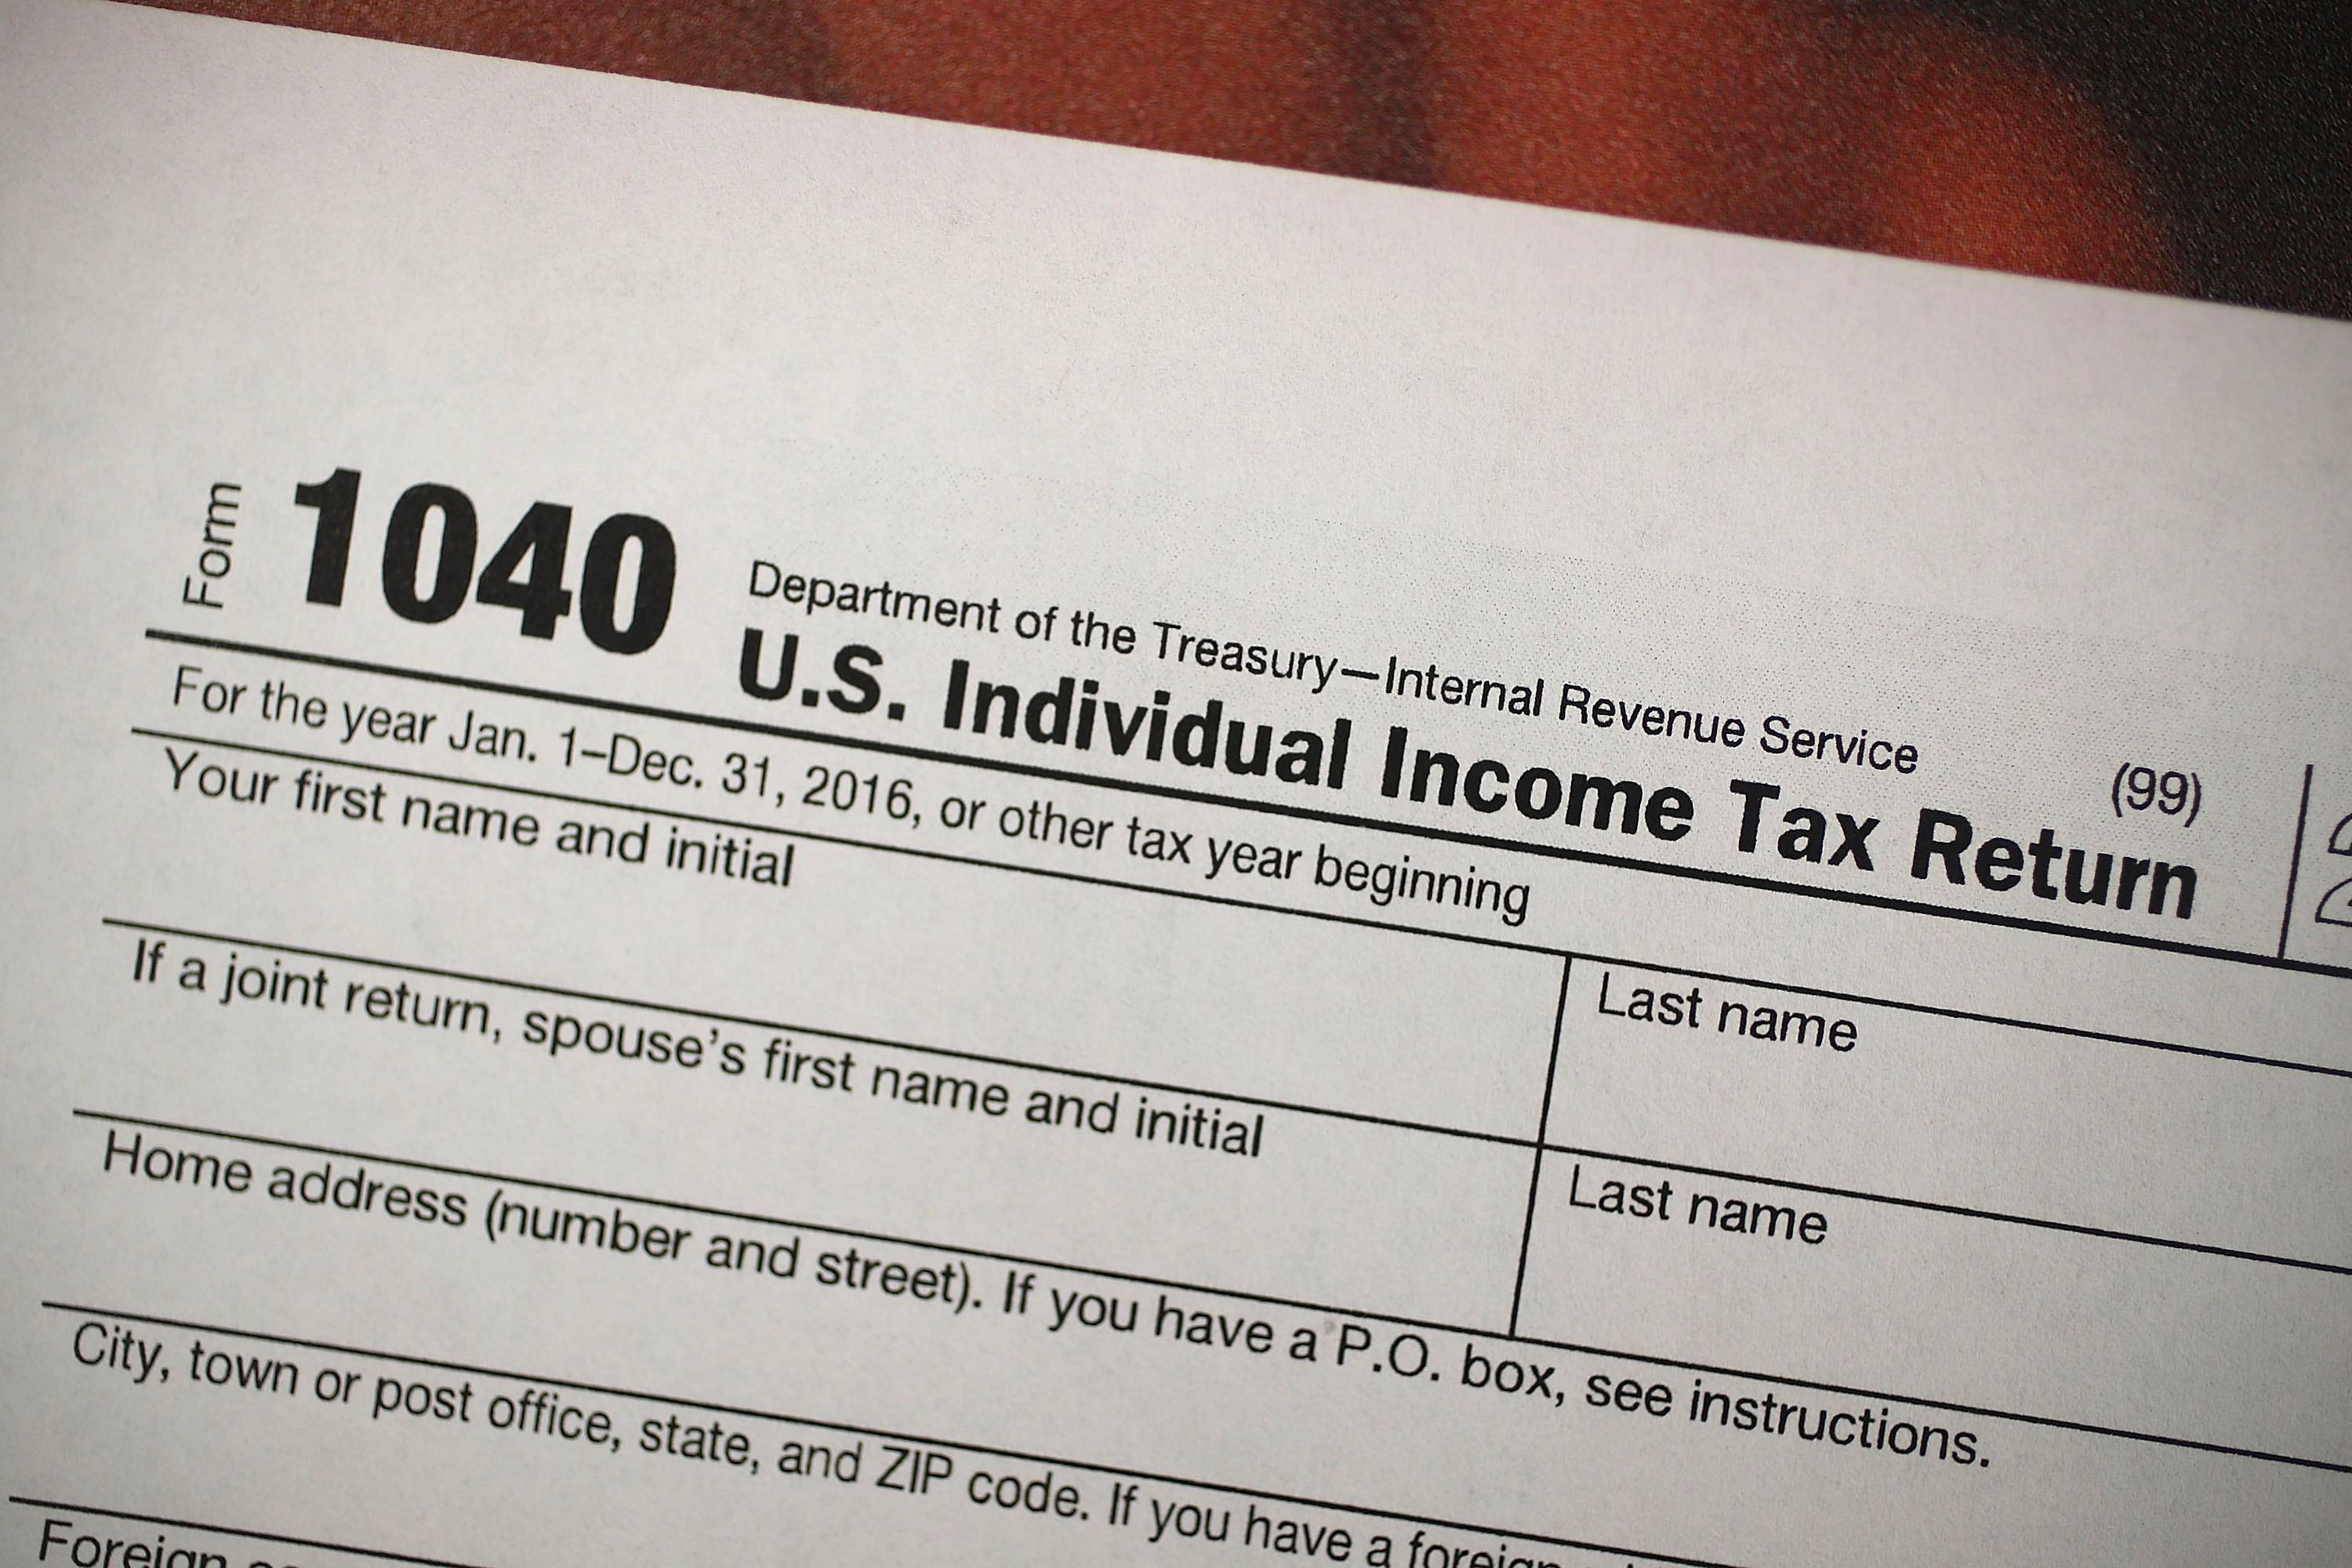 the-state-of-louisiana-botched-tax-returns-expects-residents-to-pay